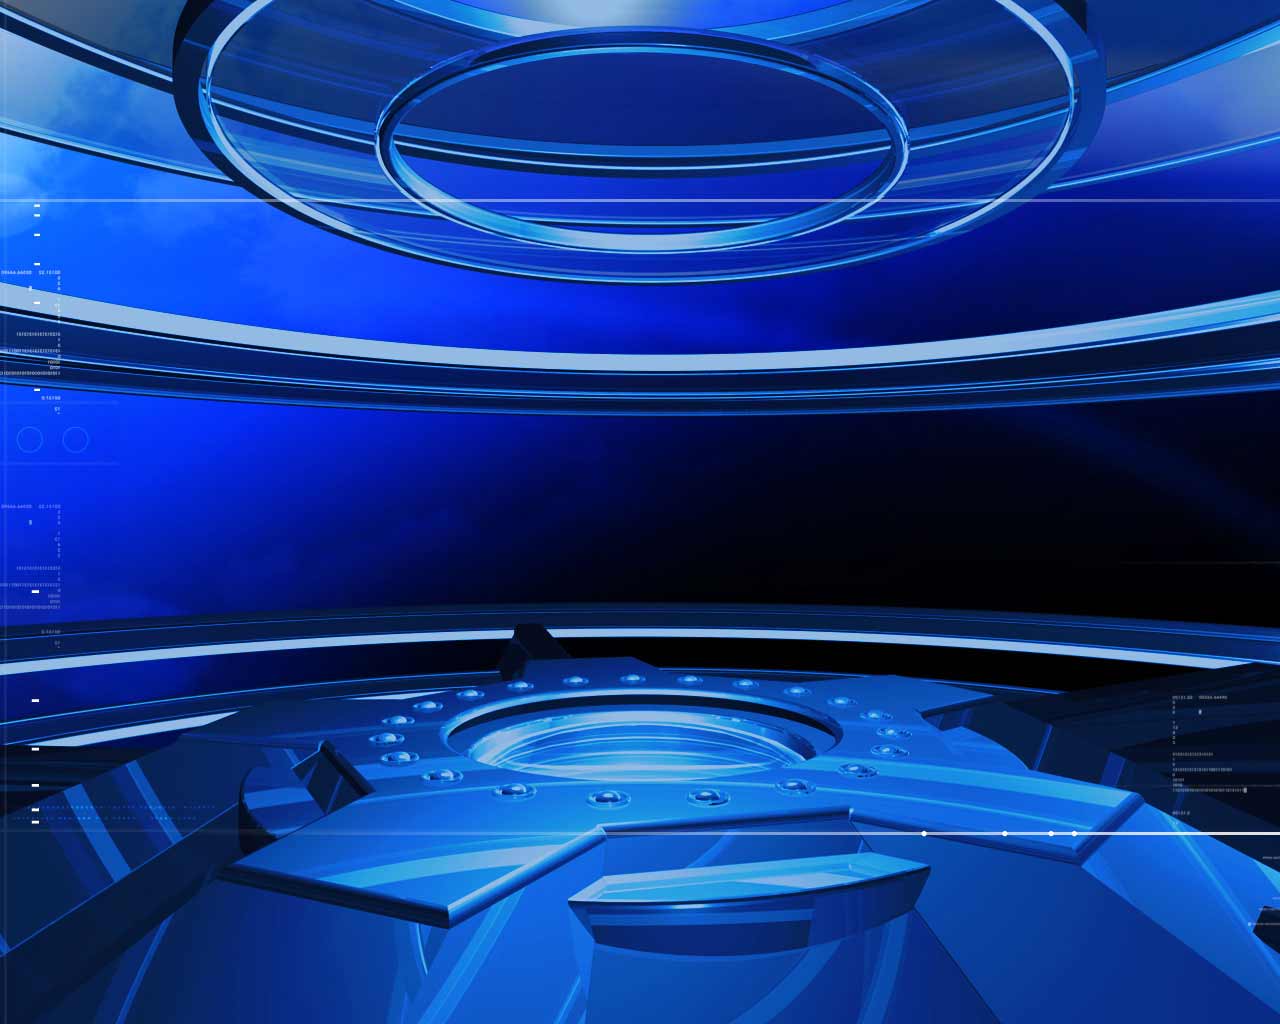 free-download-news-room-backgrounds-the-background-of-our-news